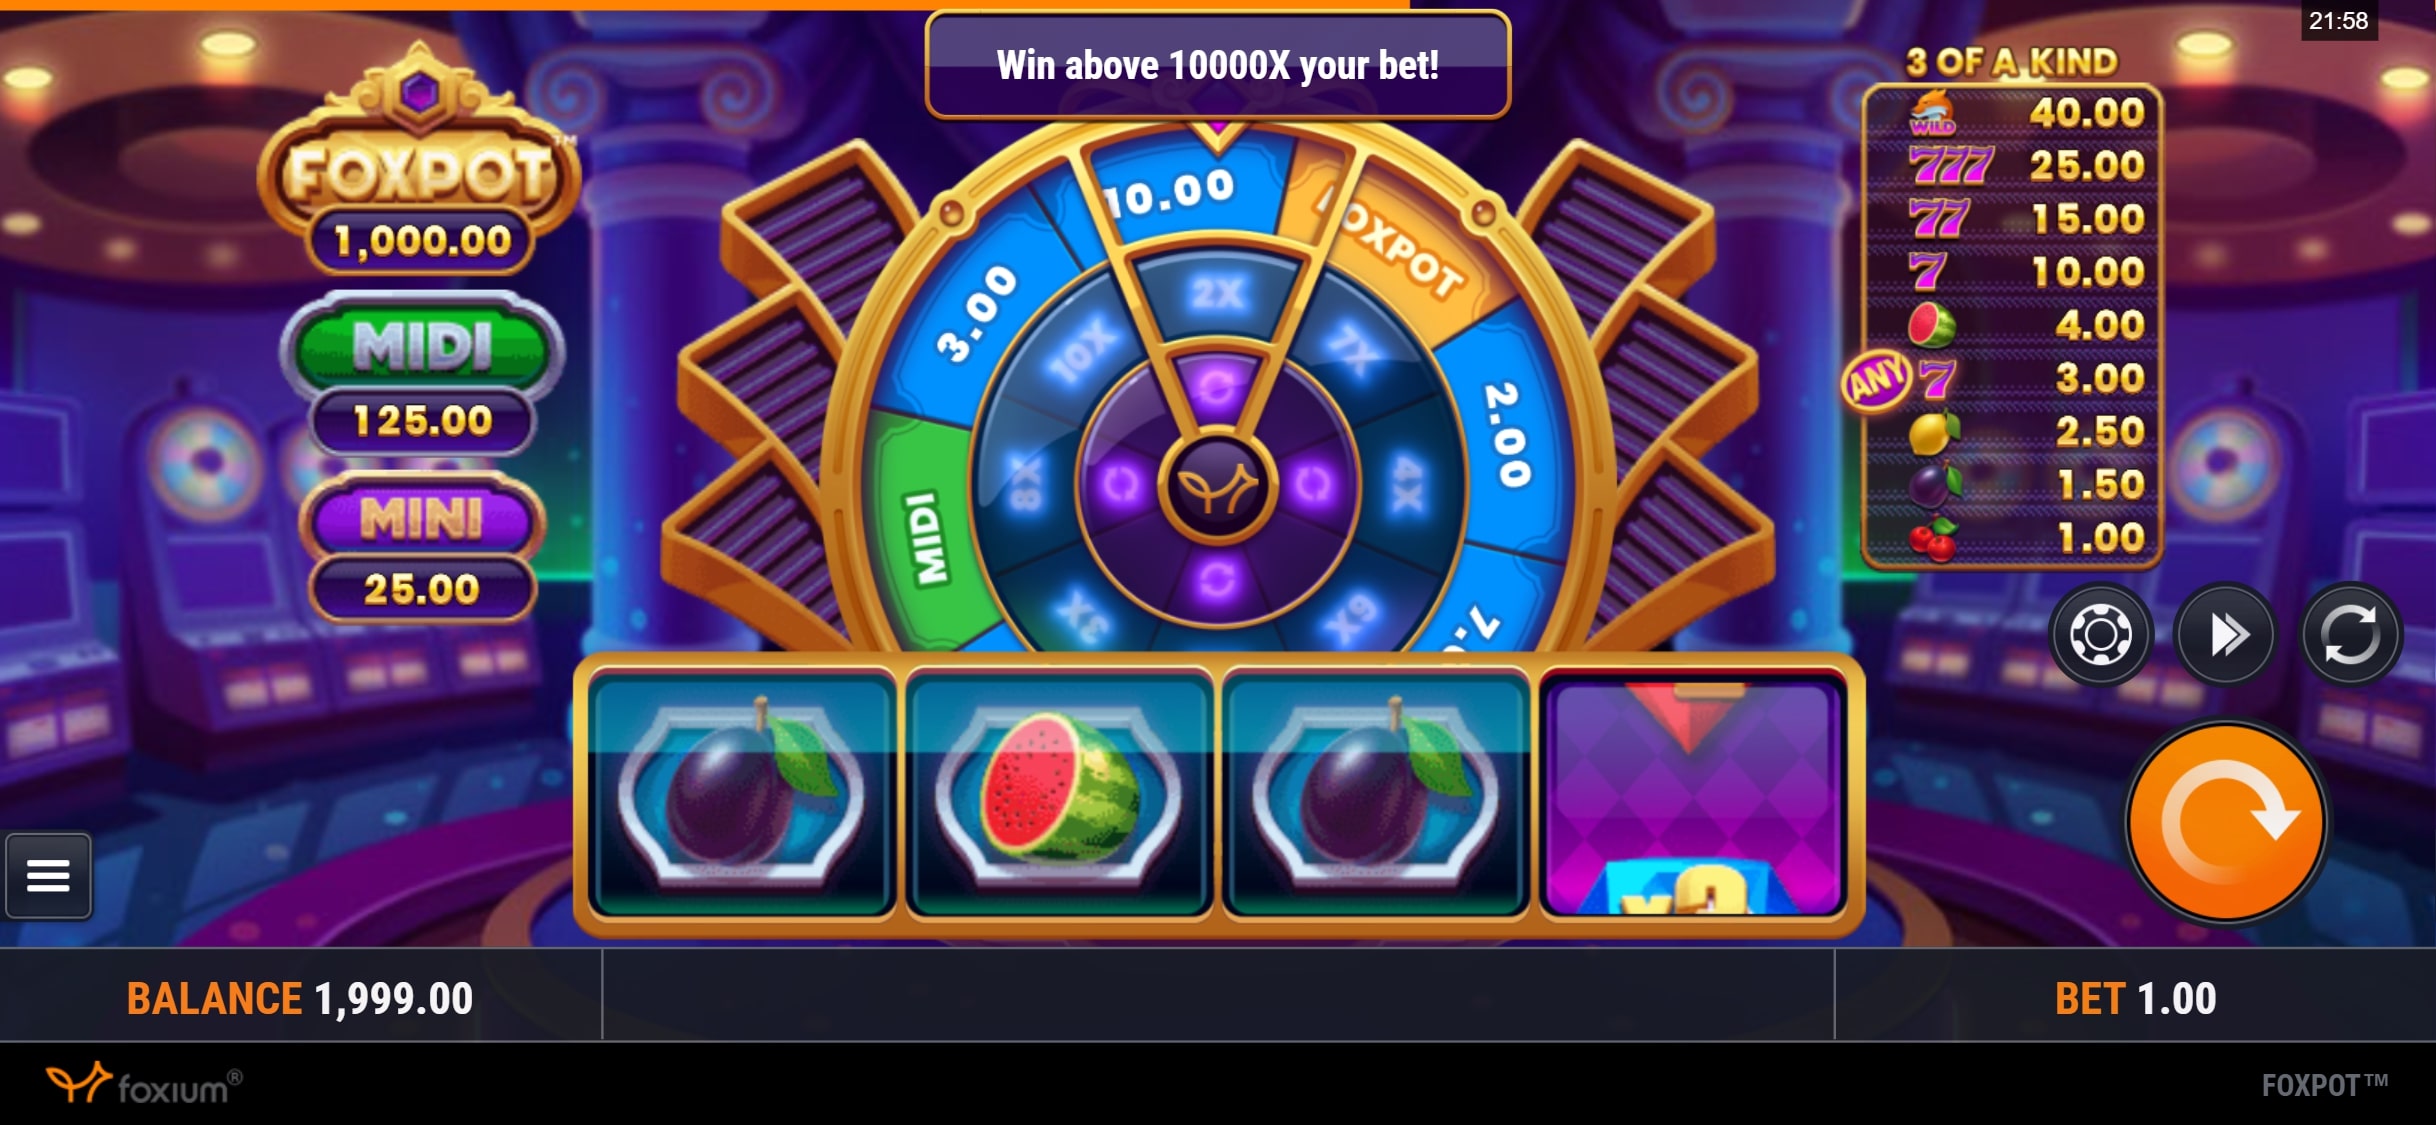 Casino Superlines Mobile Slot Games Review